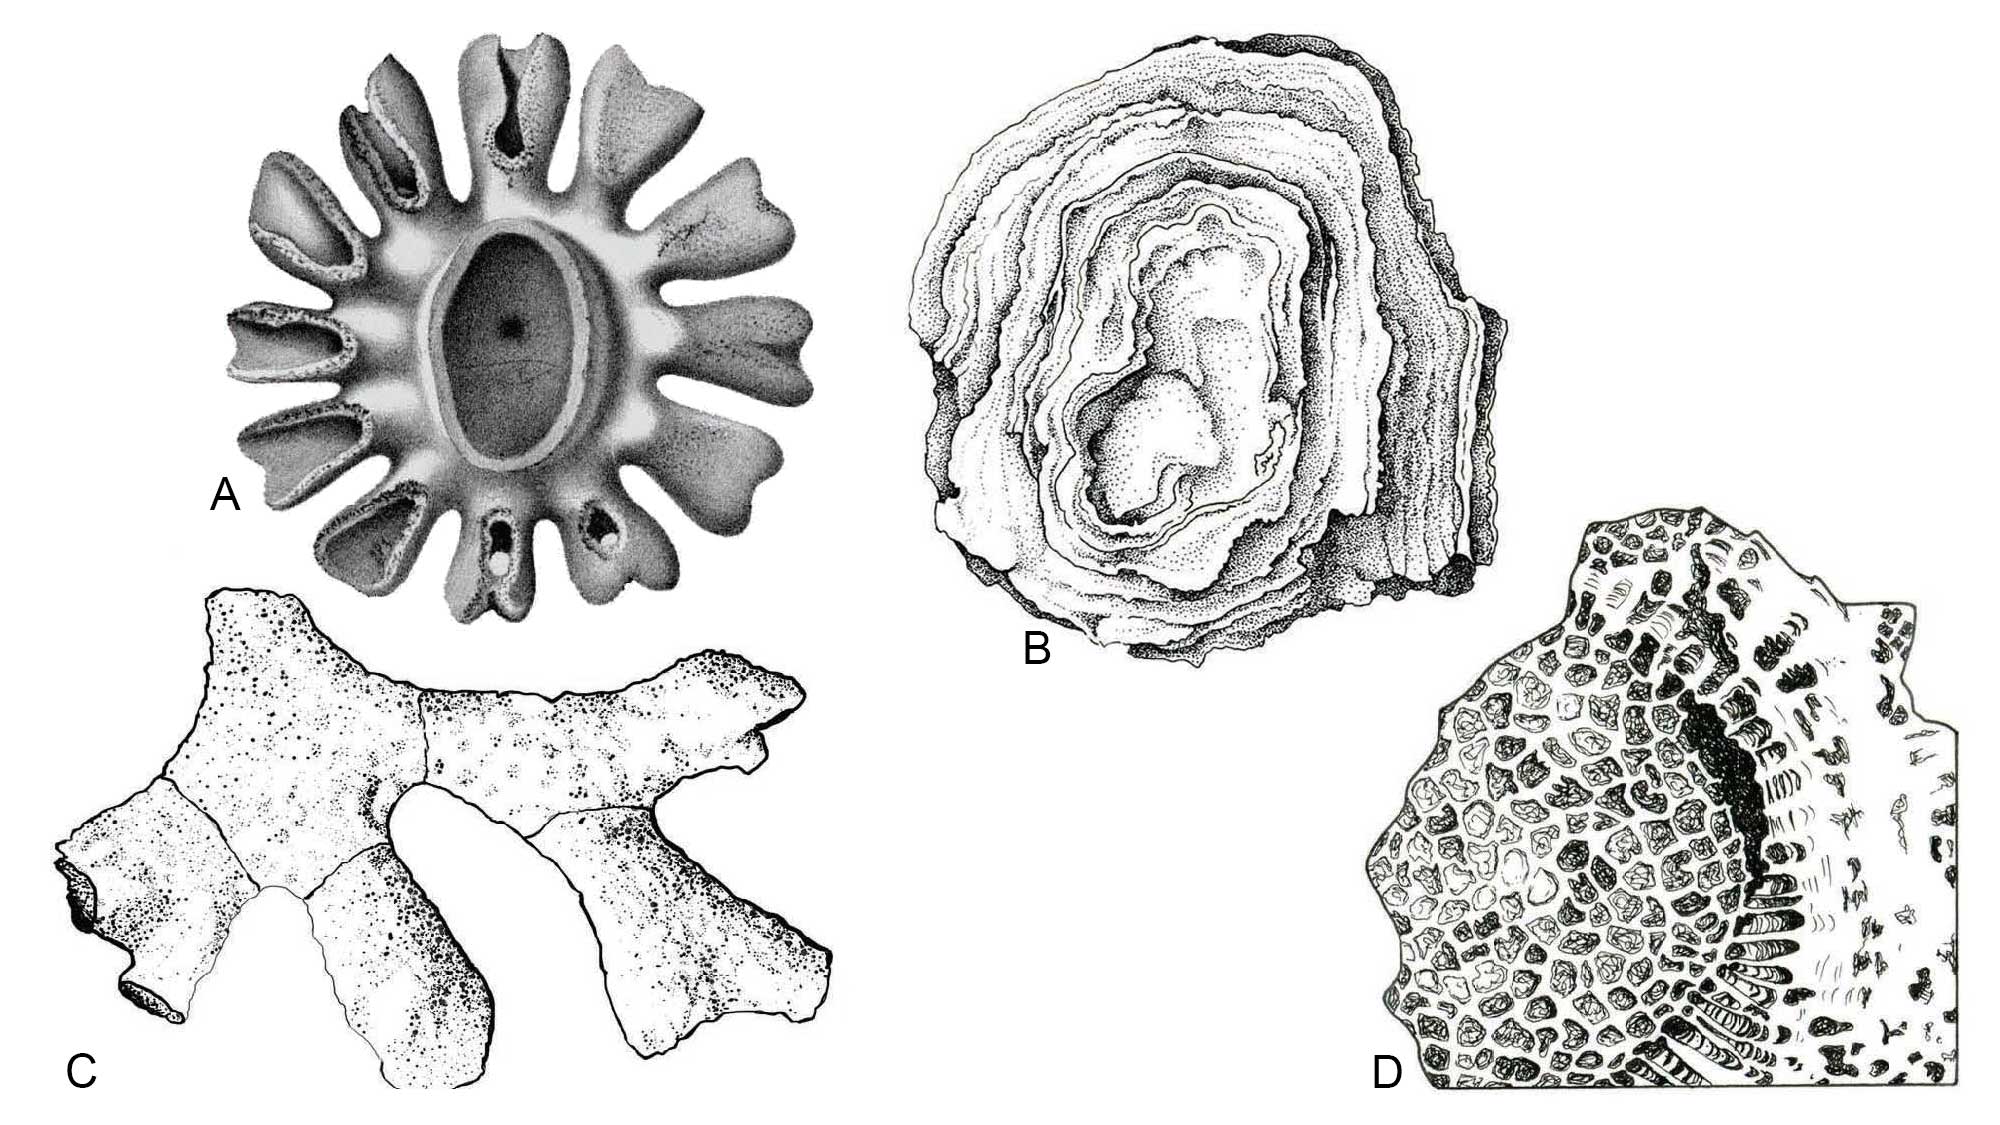 Drawings of Ordovician organisms, including a sponge, a stromatoporoid sponge, a bryozoan, and a tabulate coral.